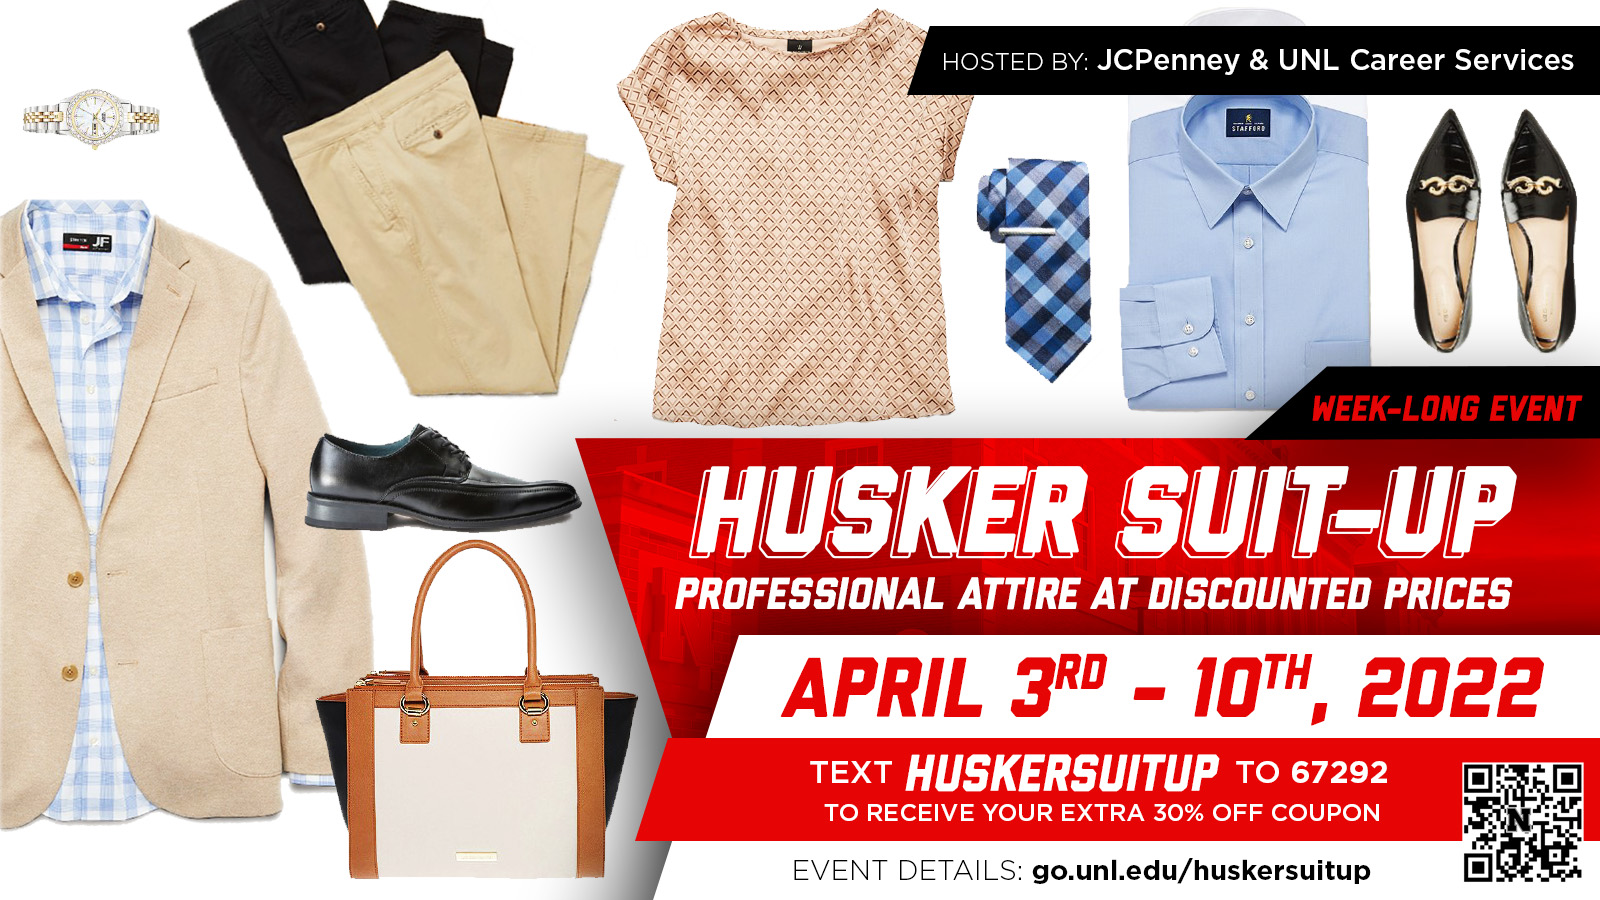 Suit yourself up in career casual or full professional through the Husker Suit-Up Spring event.